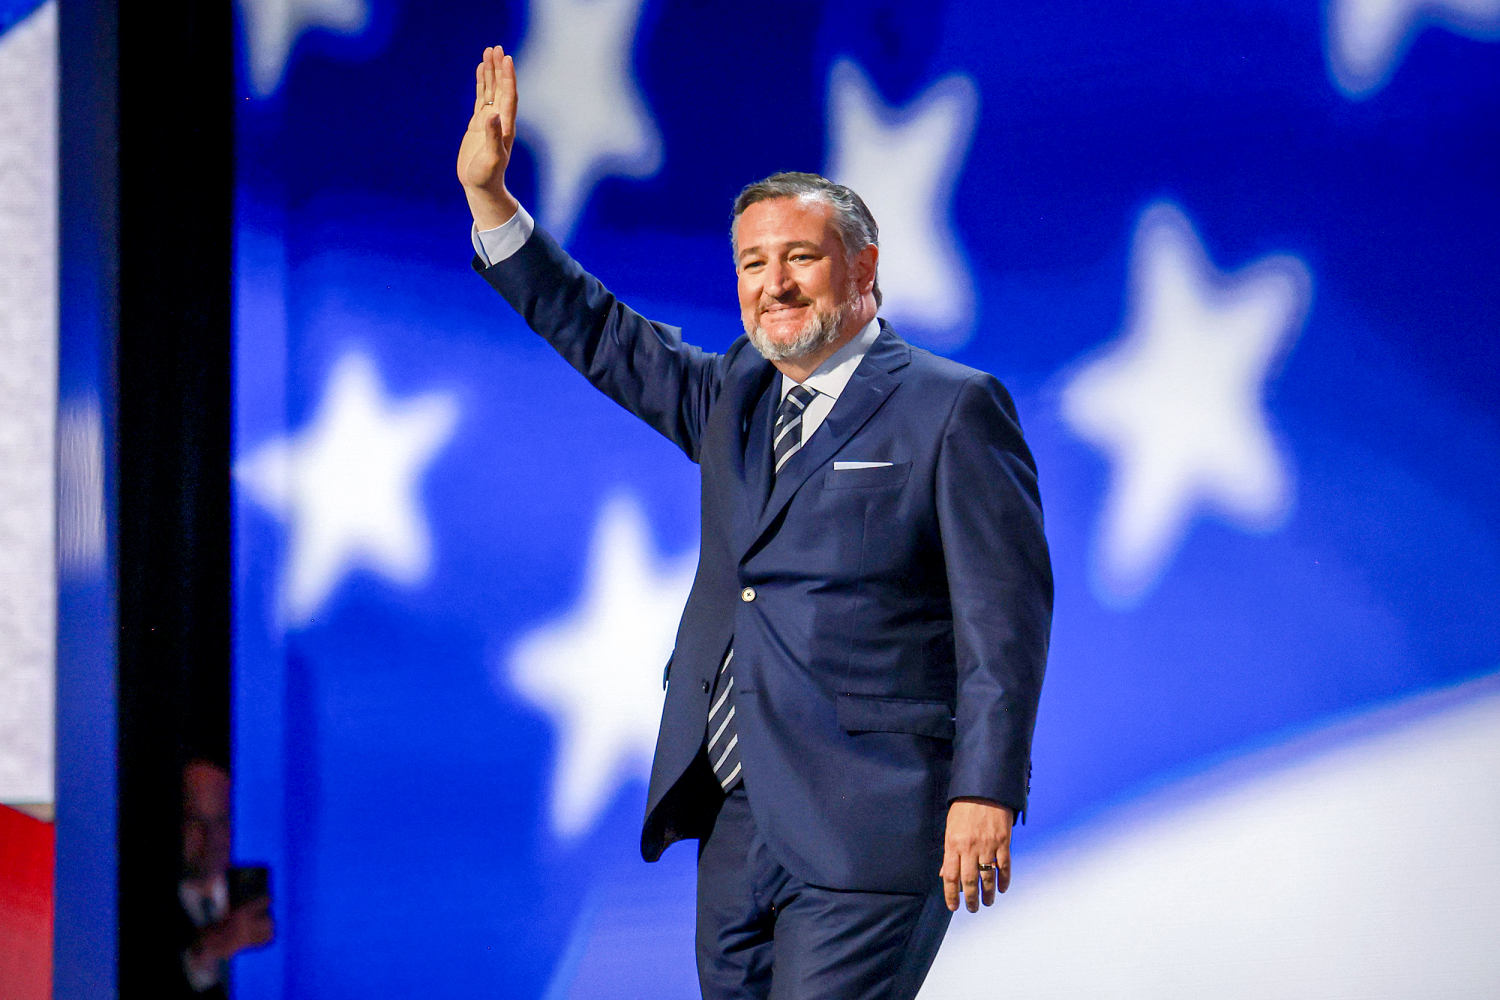 The worst thing about Ted Cruz’s dystopian RNC speech